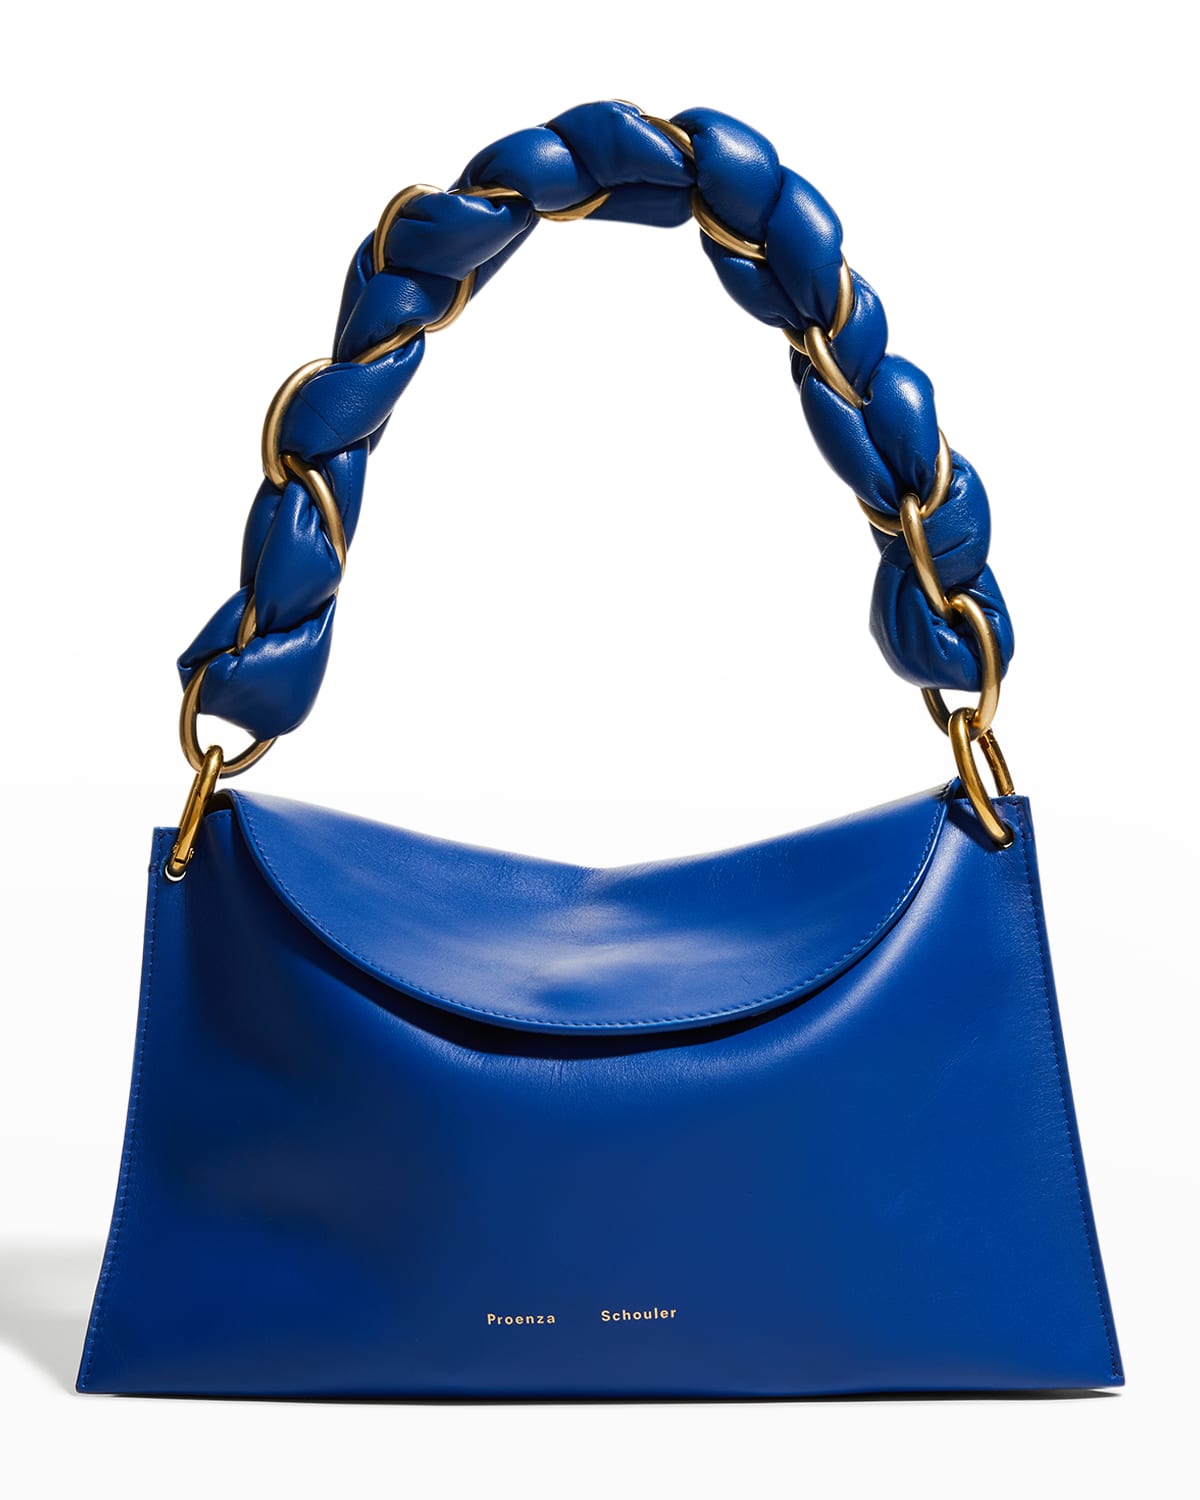 PROENZA SCHOULER BRAIDED CHAIN LEATHER SHOULDER BAG